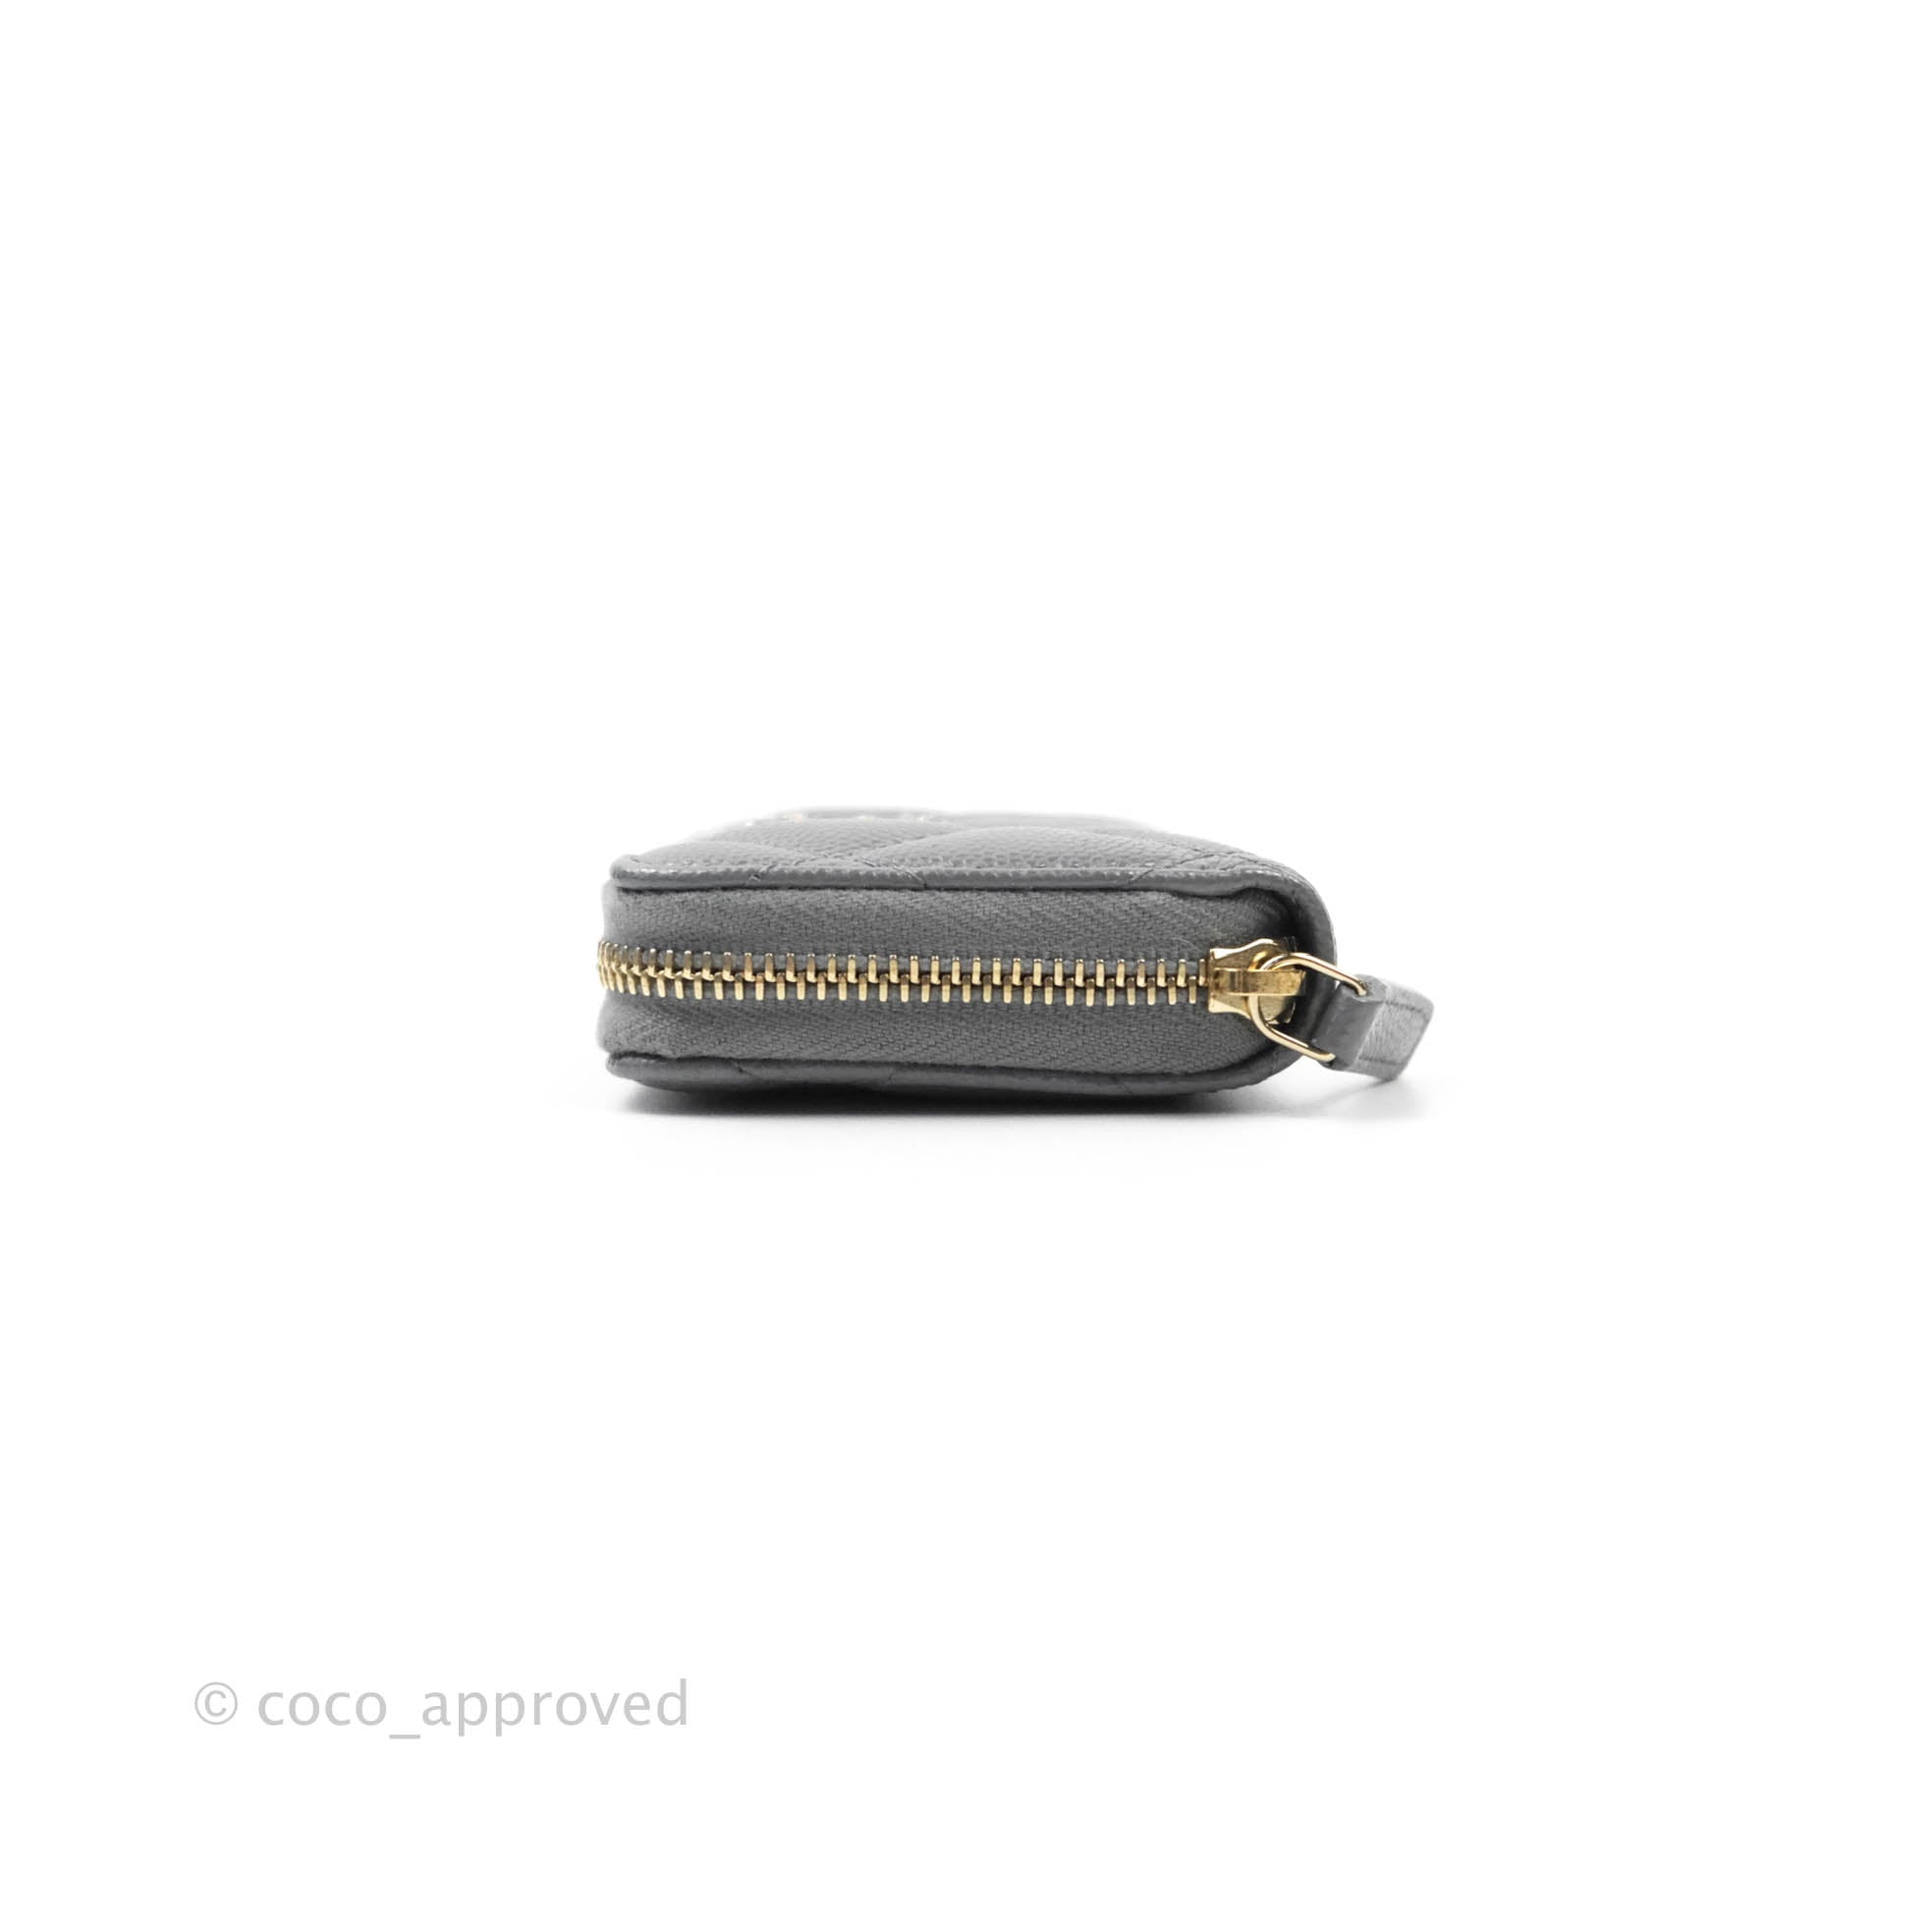 Naughtipidgins Nest - Chanel Classic Zipped Coin Purse in Black Caviar with  Shiny Gold Hardware. RRP £430 The classically styled, super practical, zip-around  compact purse, ideal Cards and Coins and just the